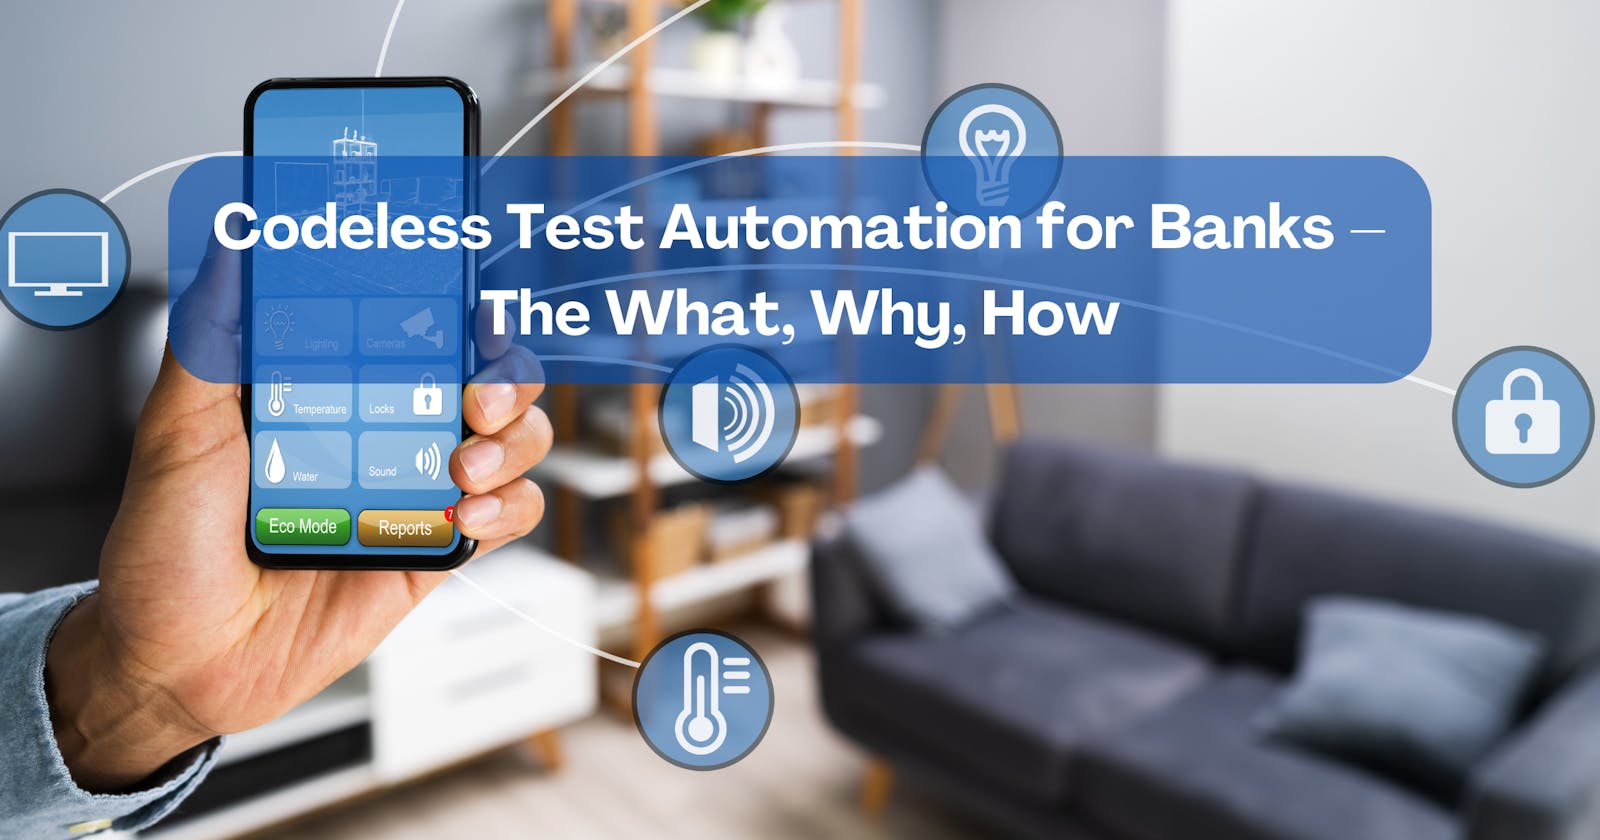 Codeless Test Automation for Banks – The What, Why, How